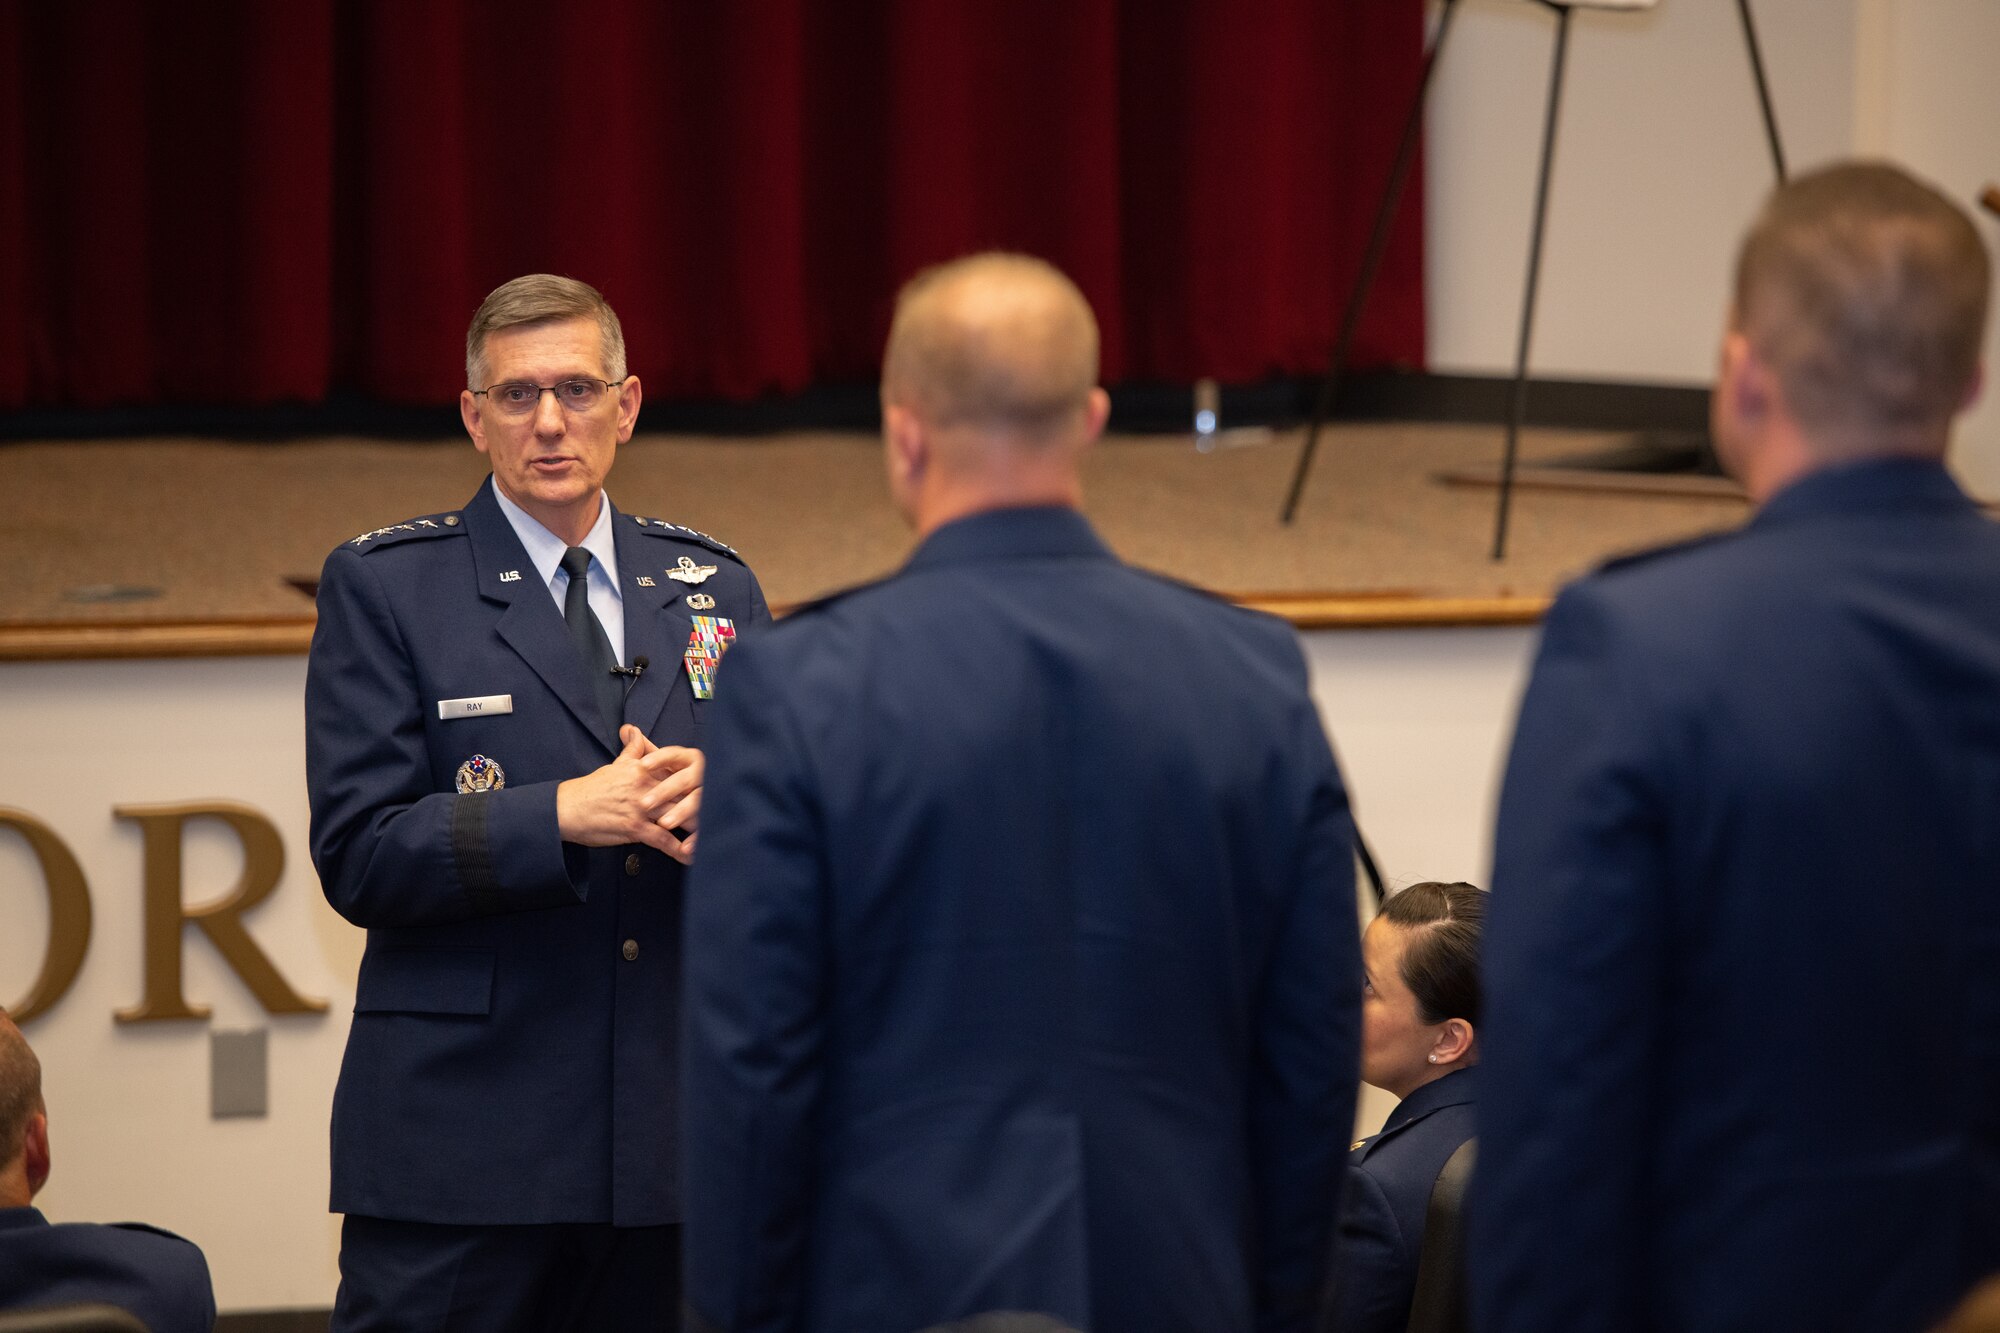 Gen. Tim Ray, Air Force Global Strike Command commander, speaks with members of Officer Training School’s “Godzilla” class 19-07 during a commissioning ceremony Sept. 27, 2019, at Maxwell Air Force Base, Ala. Class 19-07, dubbed internally as “Godzilla,” started with more than 800 officer trainees, effectively double the average class size.